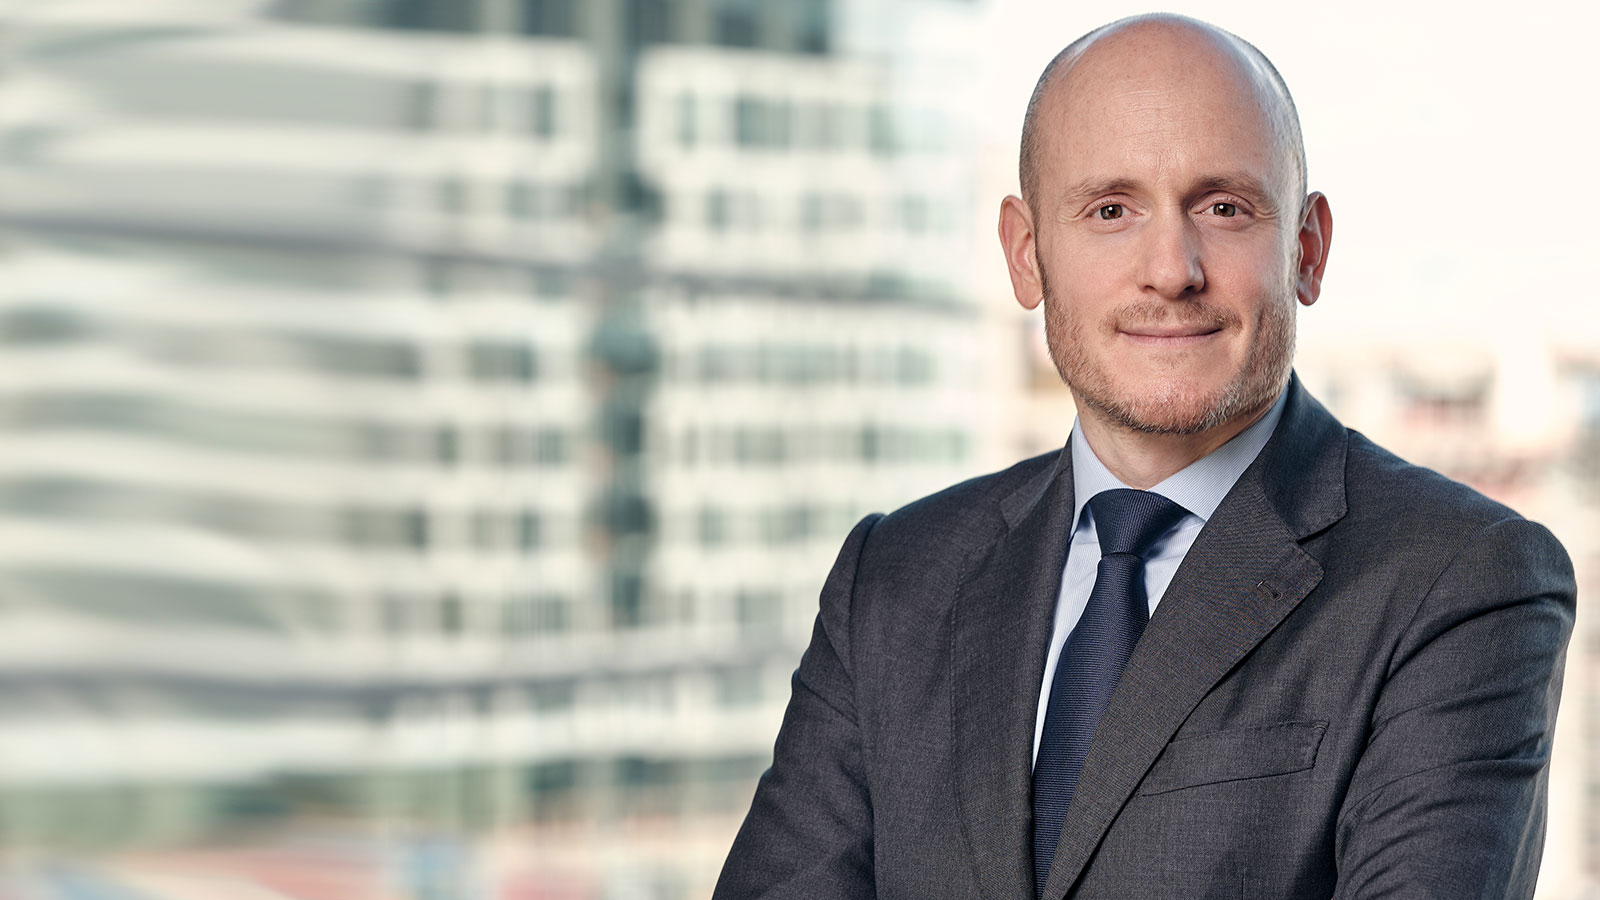 Cédric Raffoul joins PwC Legal and takes the lead of the Banking & Capital Markets department